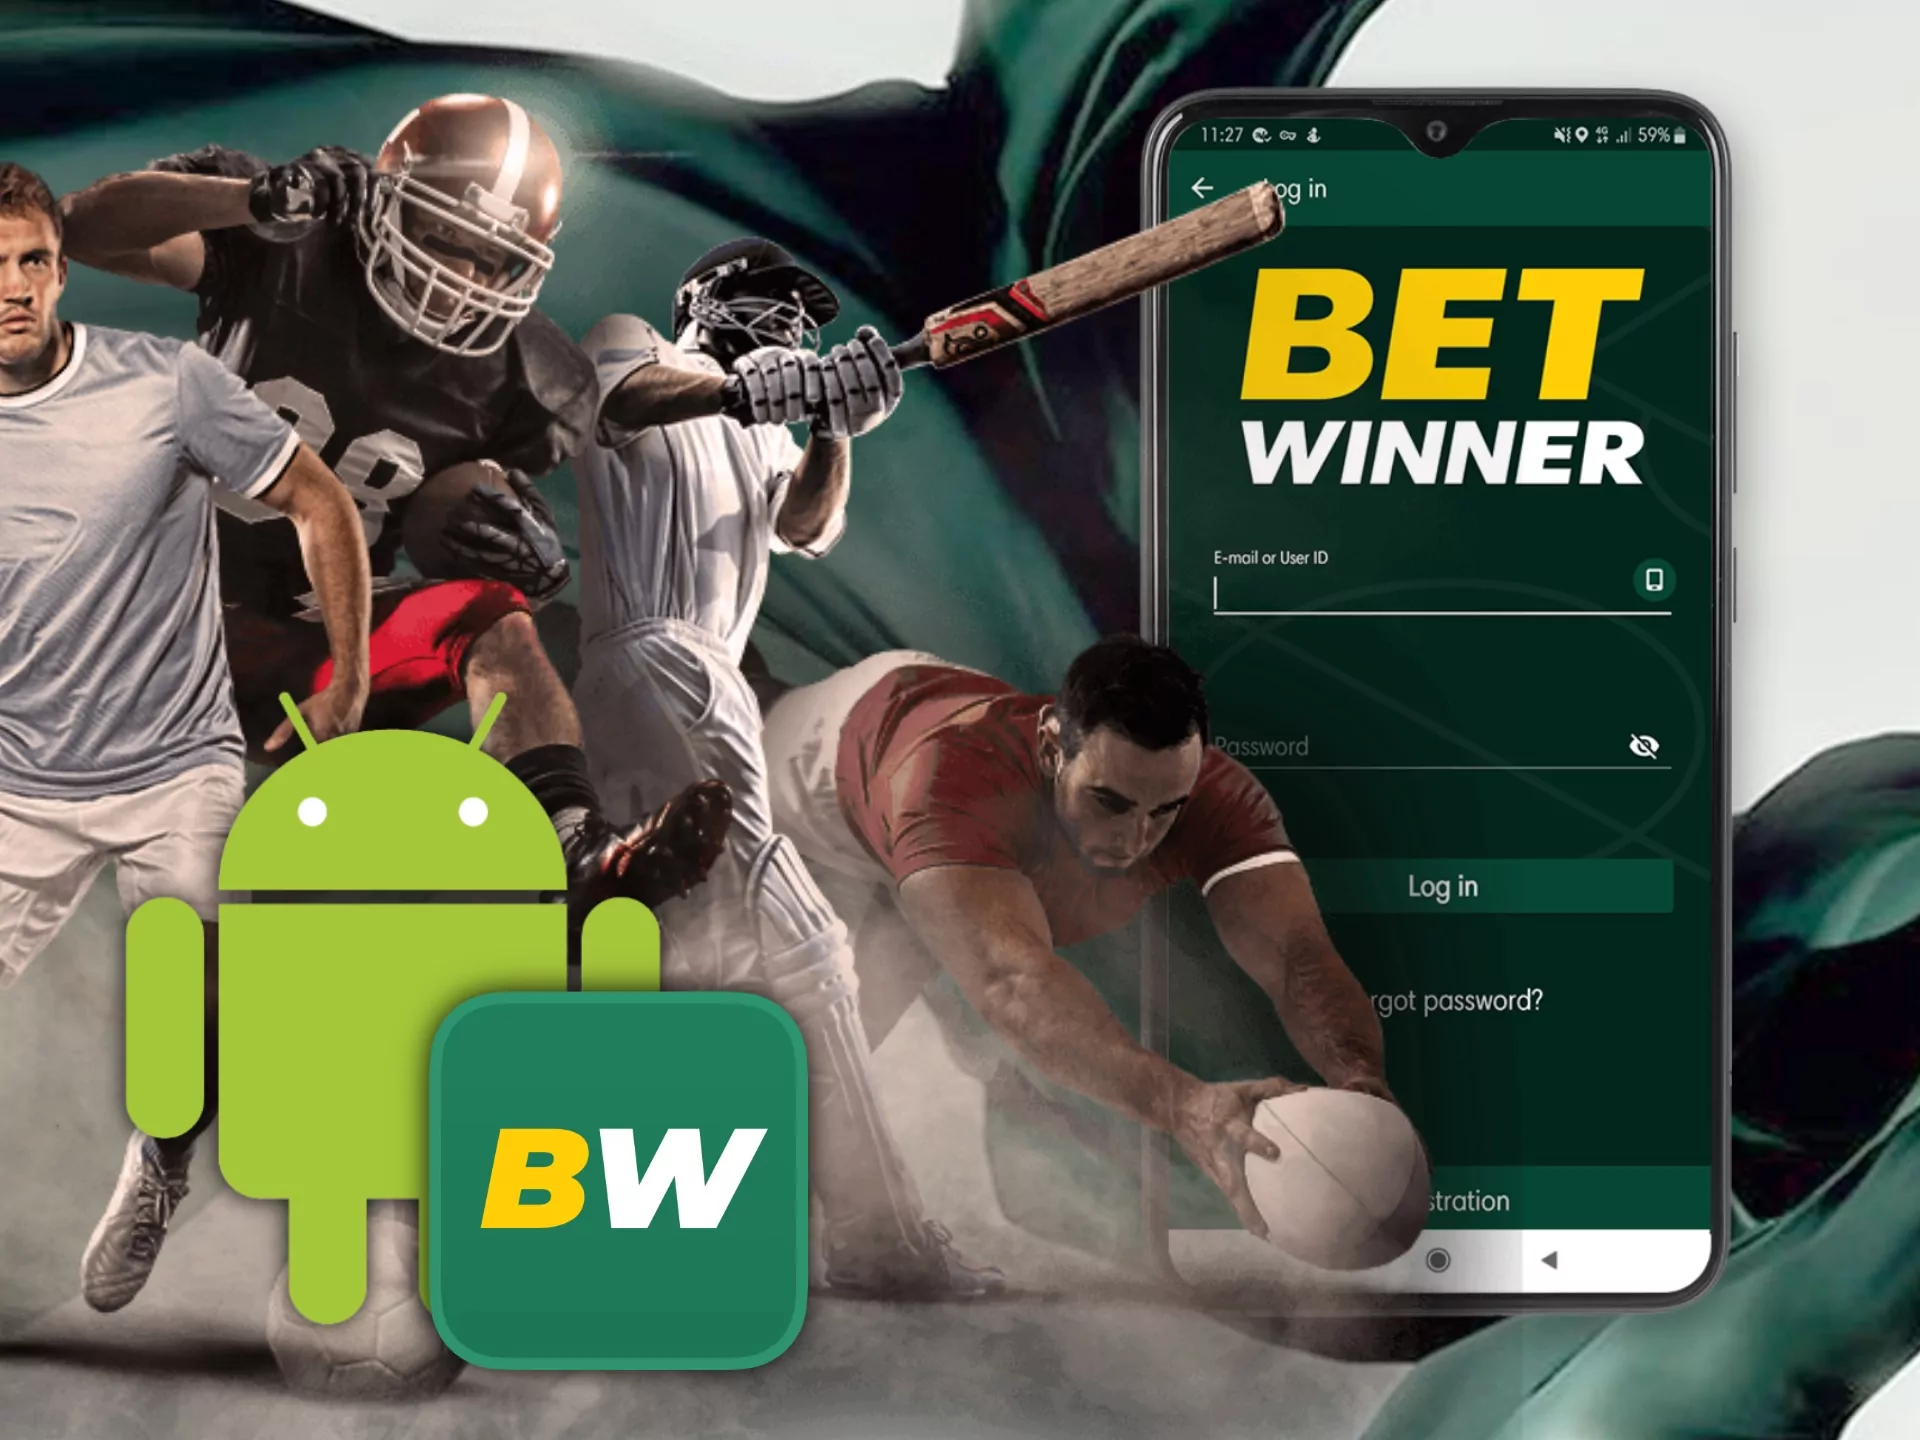 If you have an Android phone, you can bet using the Betwinner application.